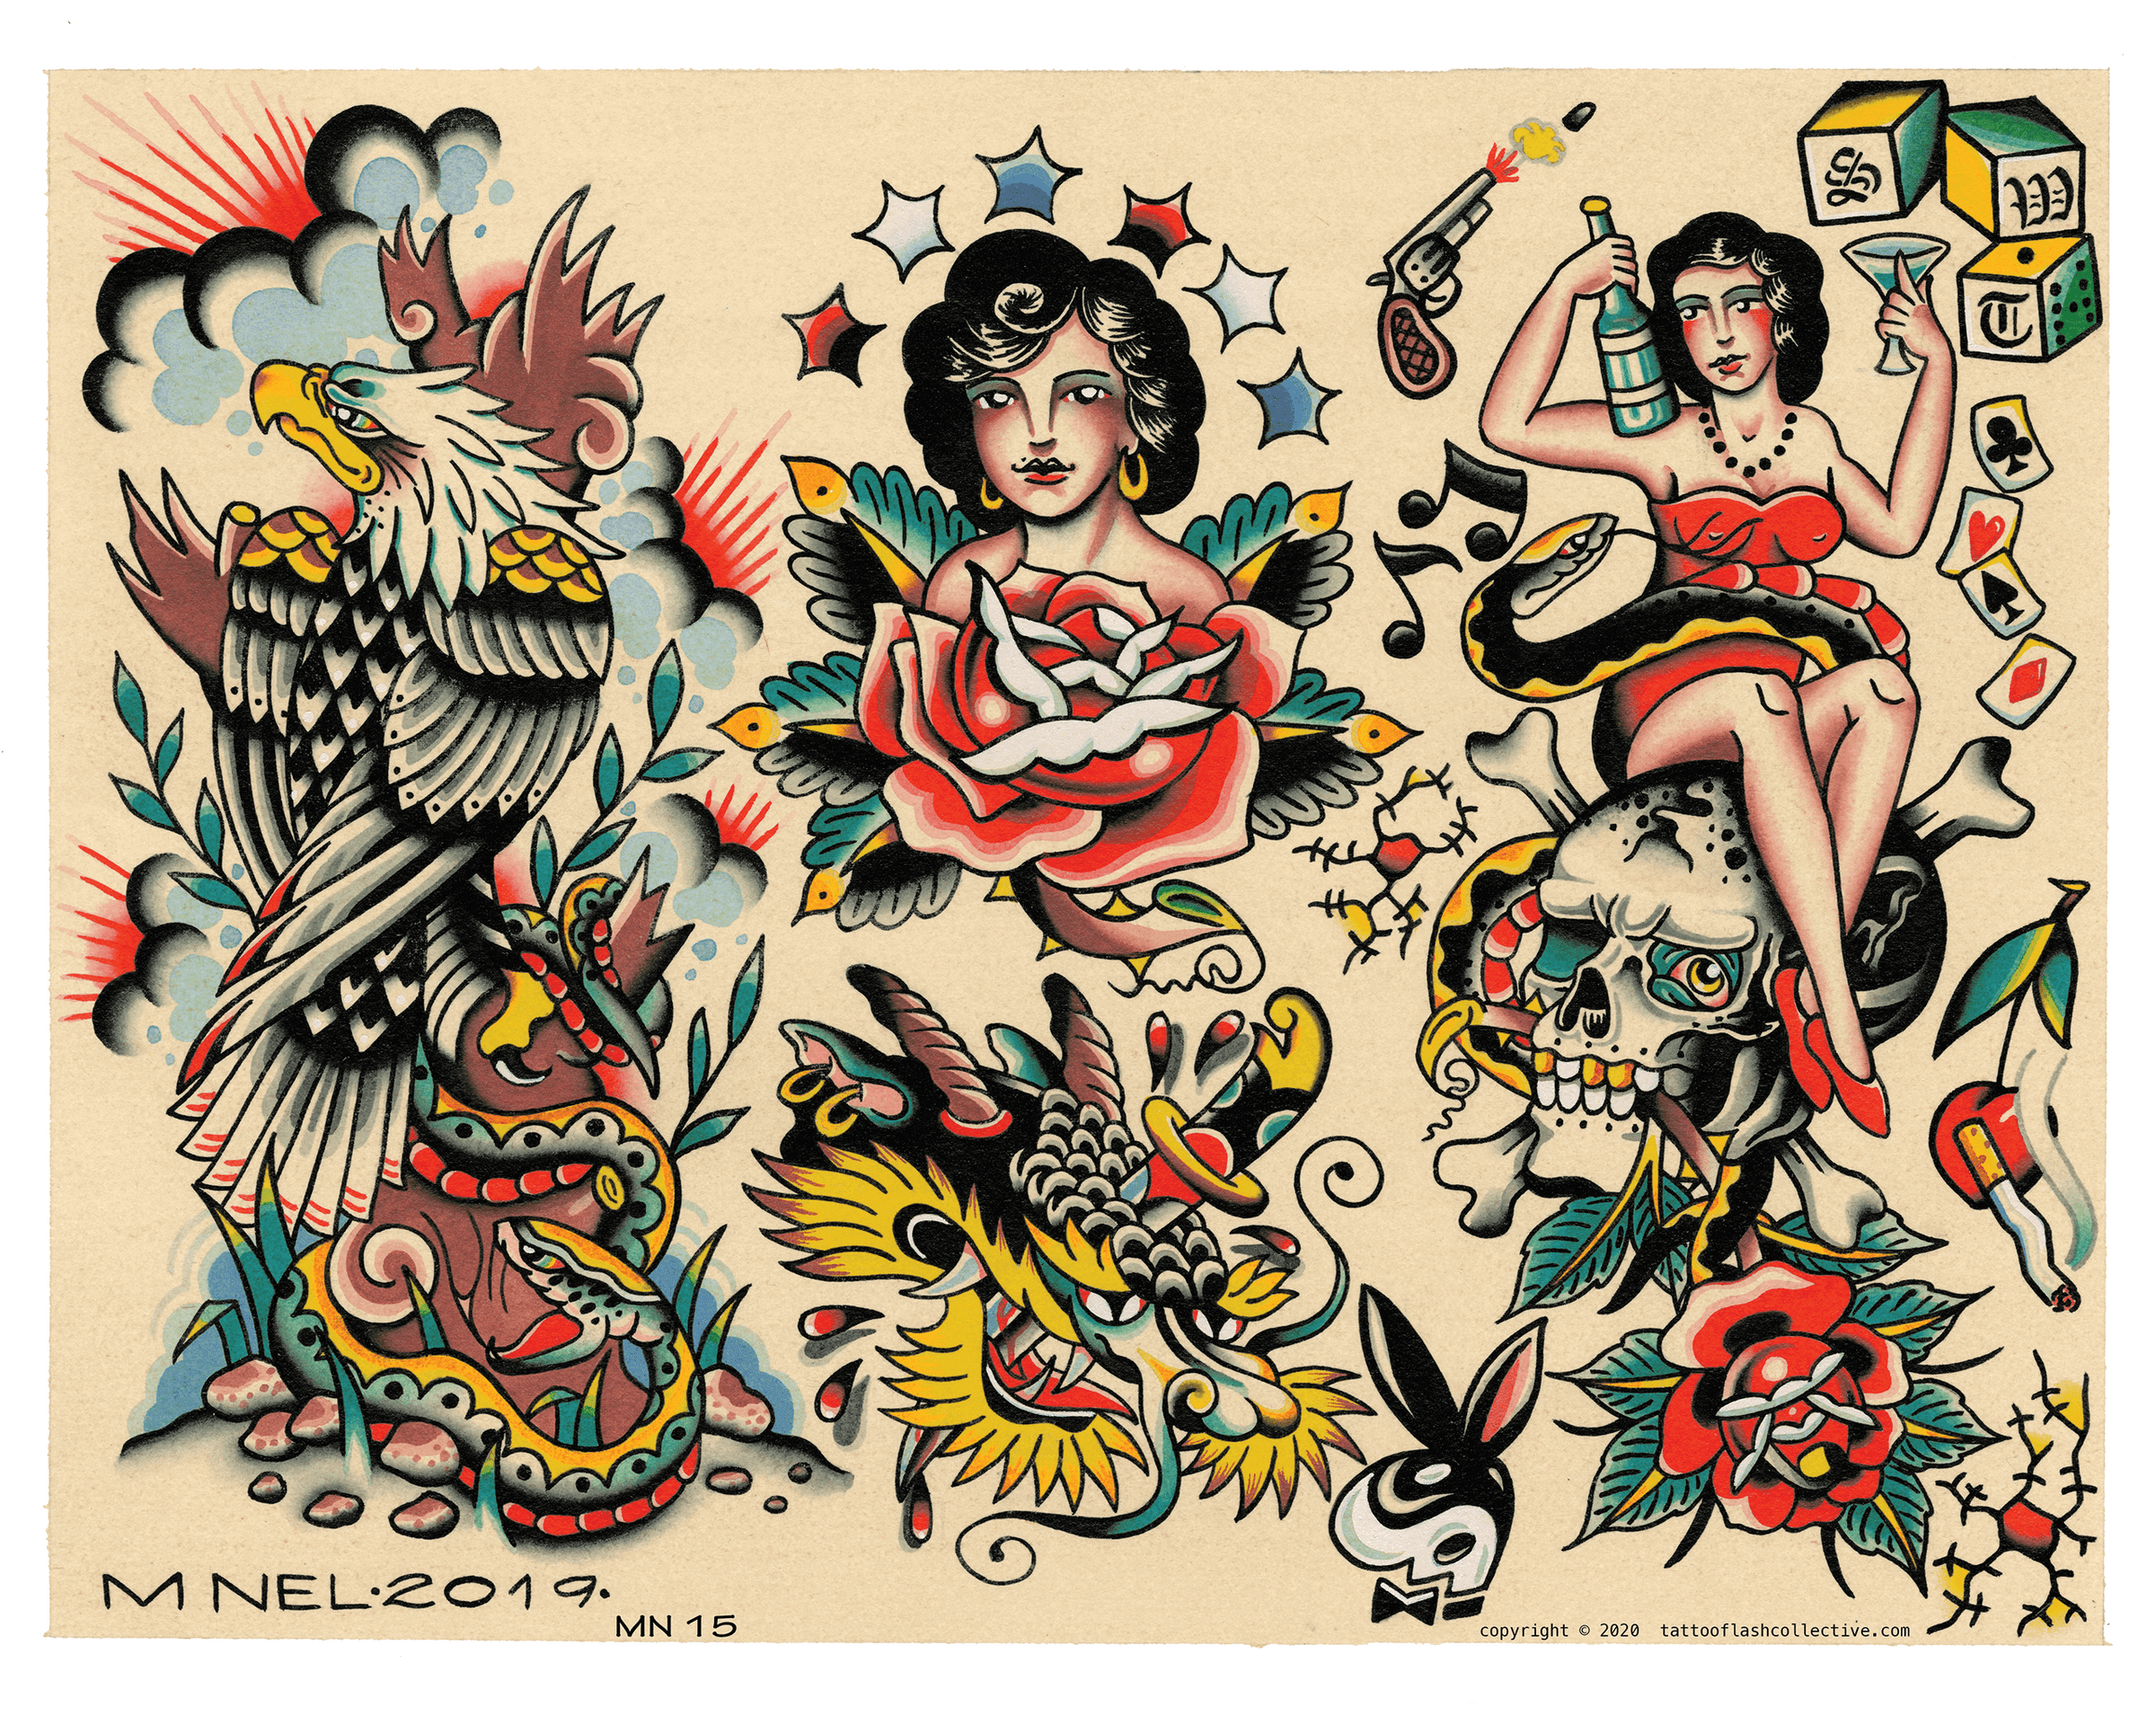 TRADITIONAL TATTOO FLASH CUSTOM FACE by Artdover Project on Dribbble